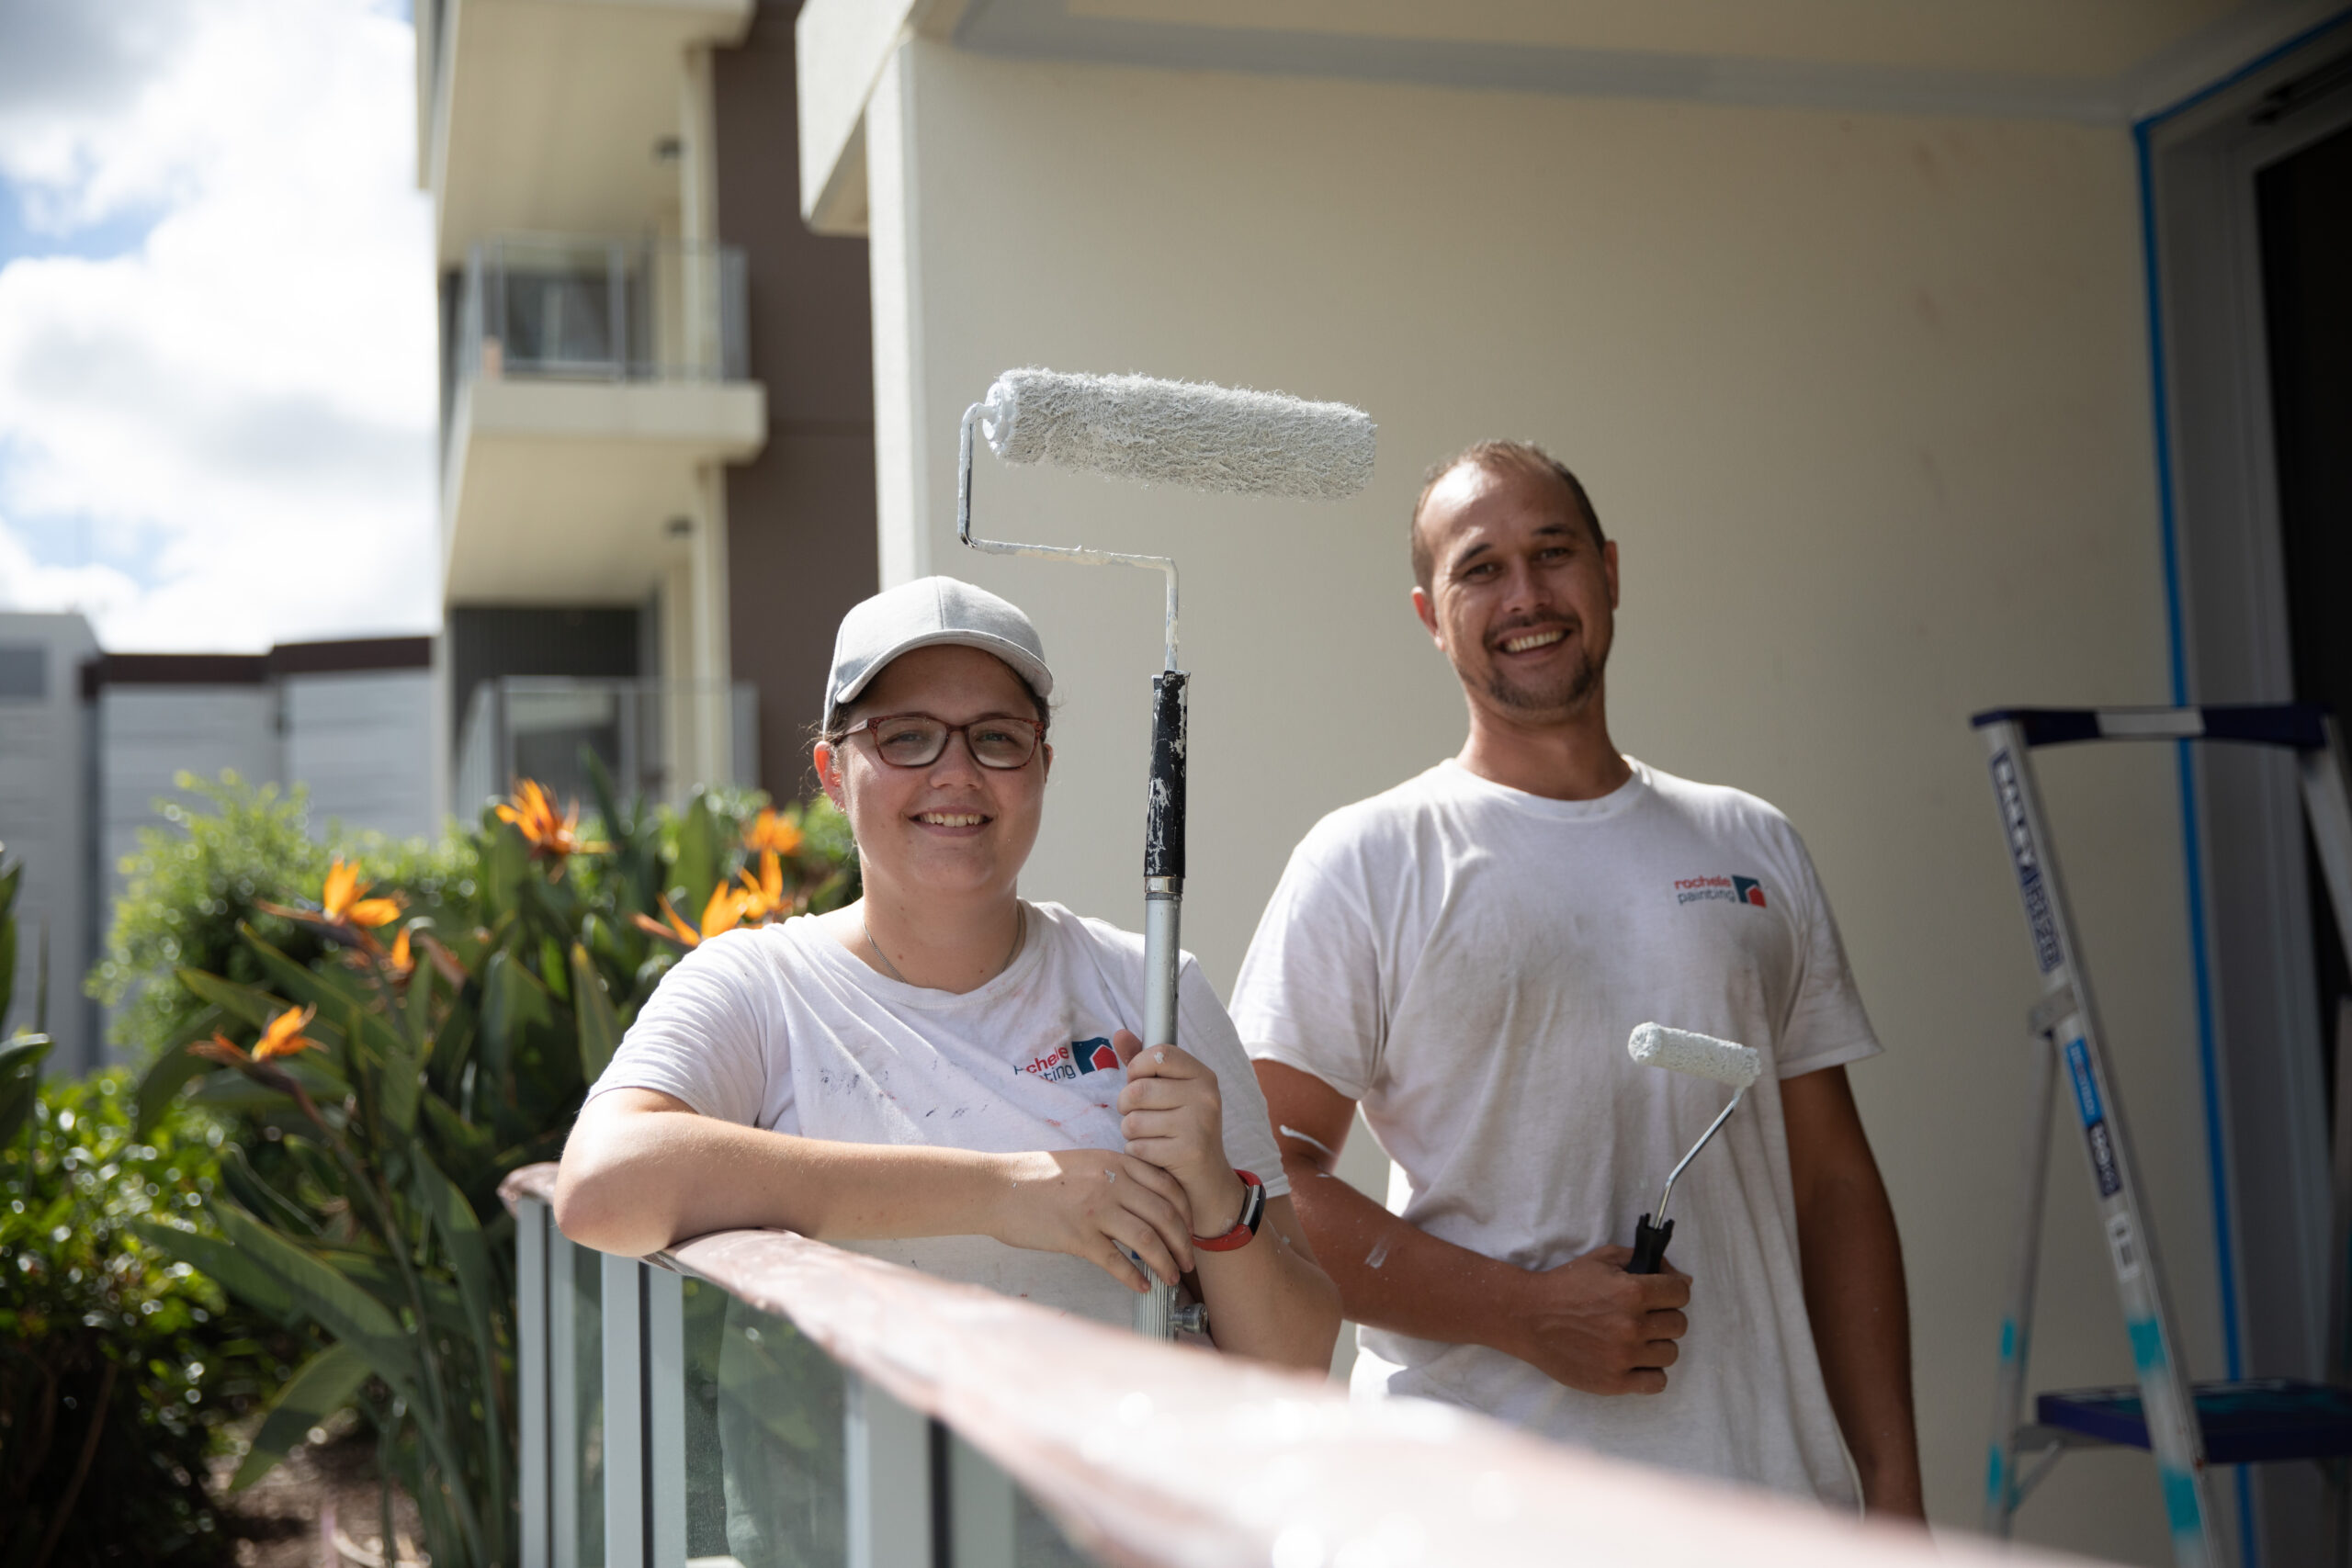 Rochele Painting is South East Queensland’s go-to specialist